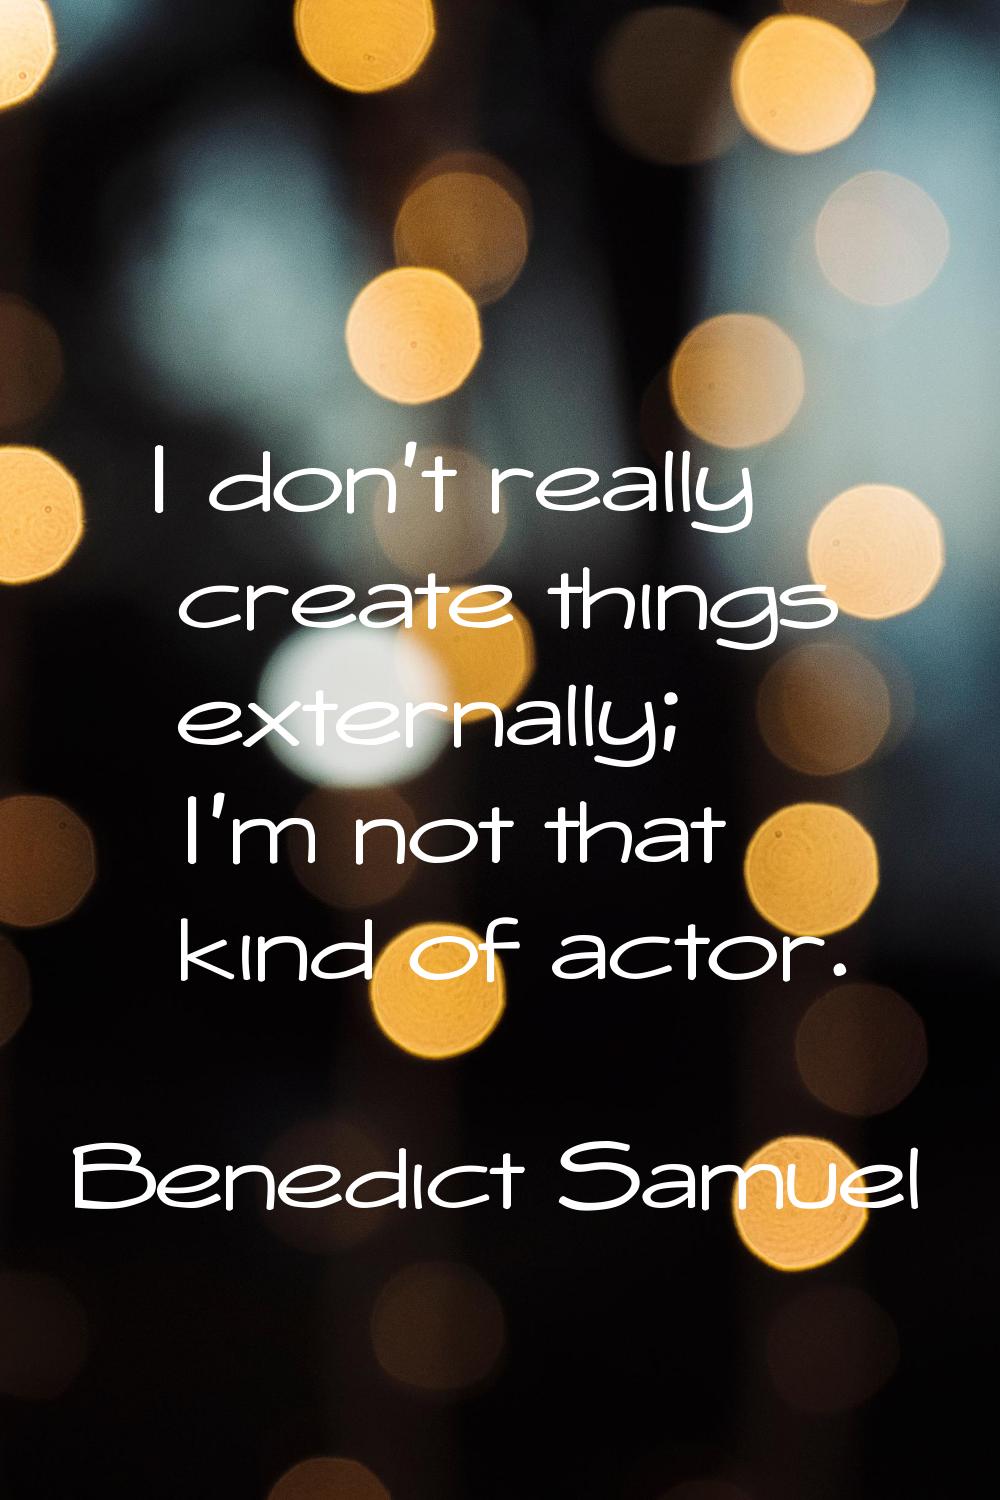 I don't really create things externally; I'm not that kind of actor.